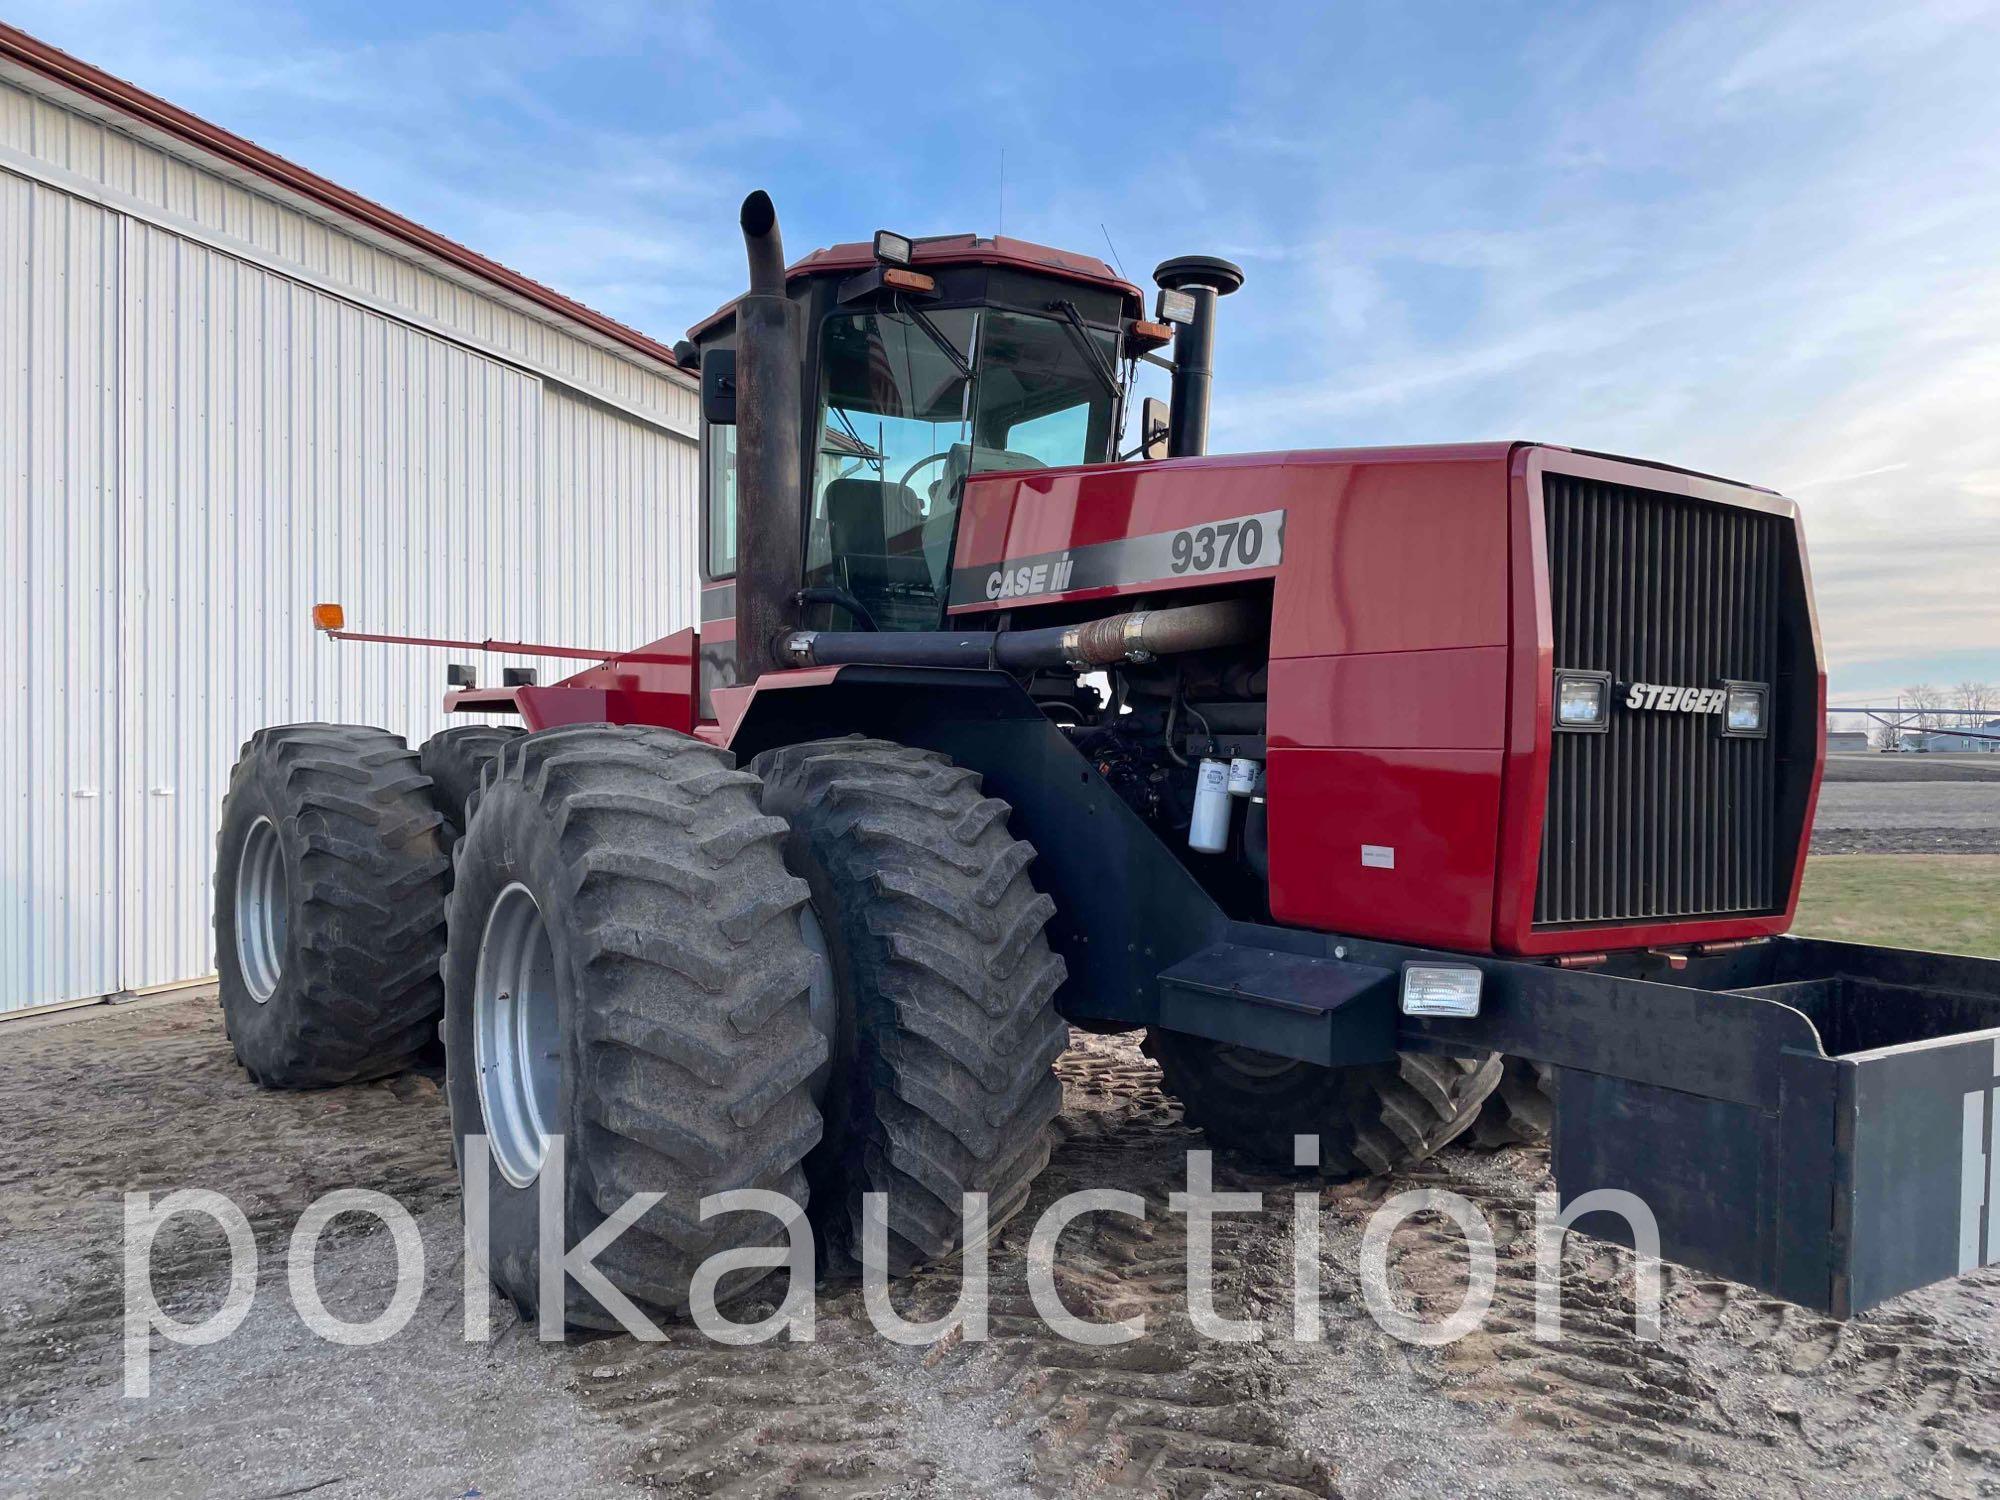 Case IH 9370 Tractor